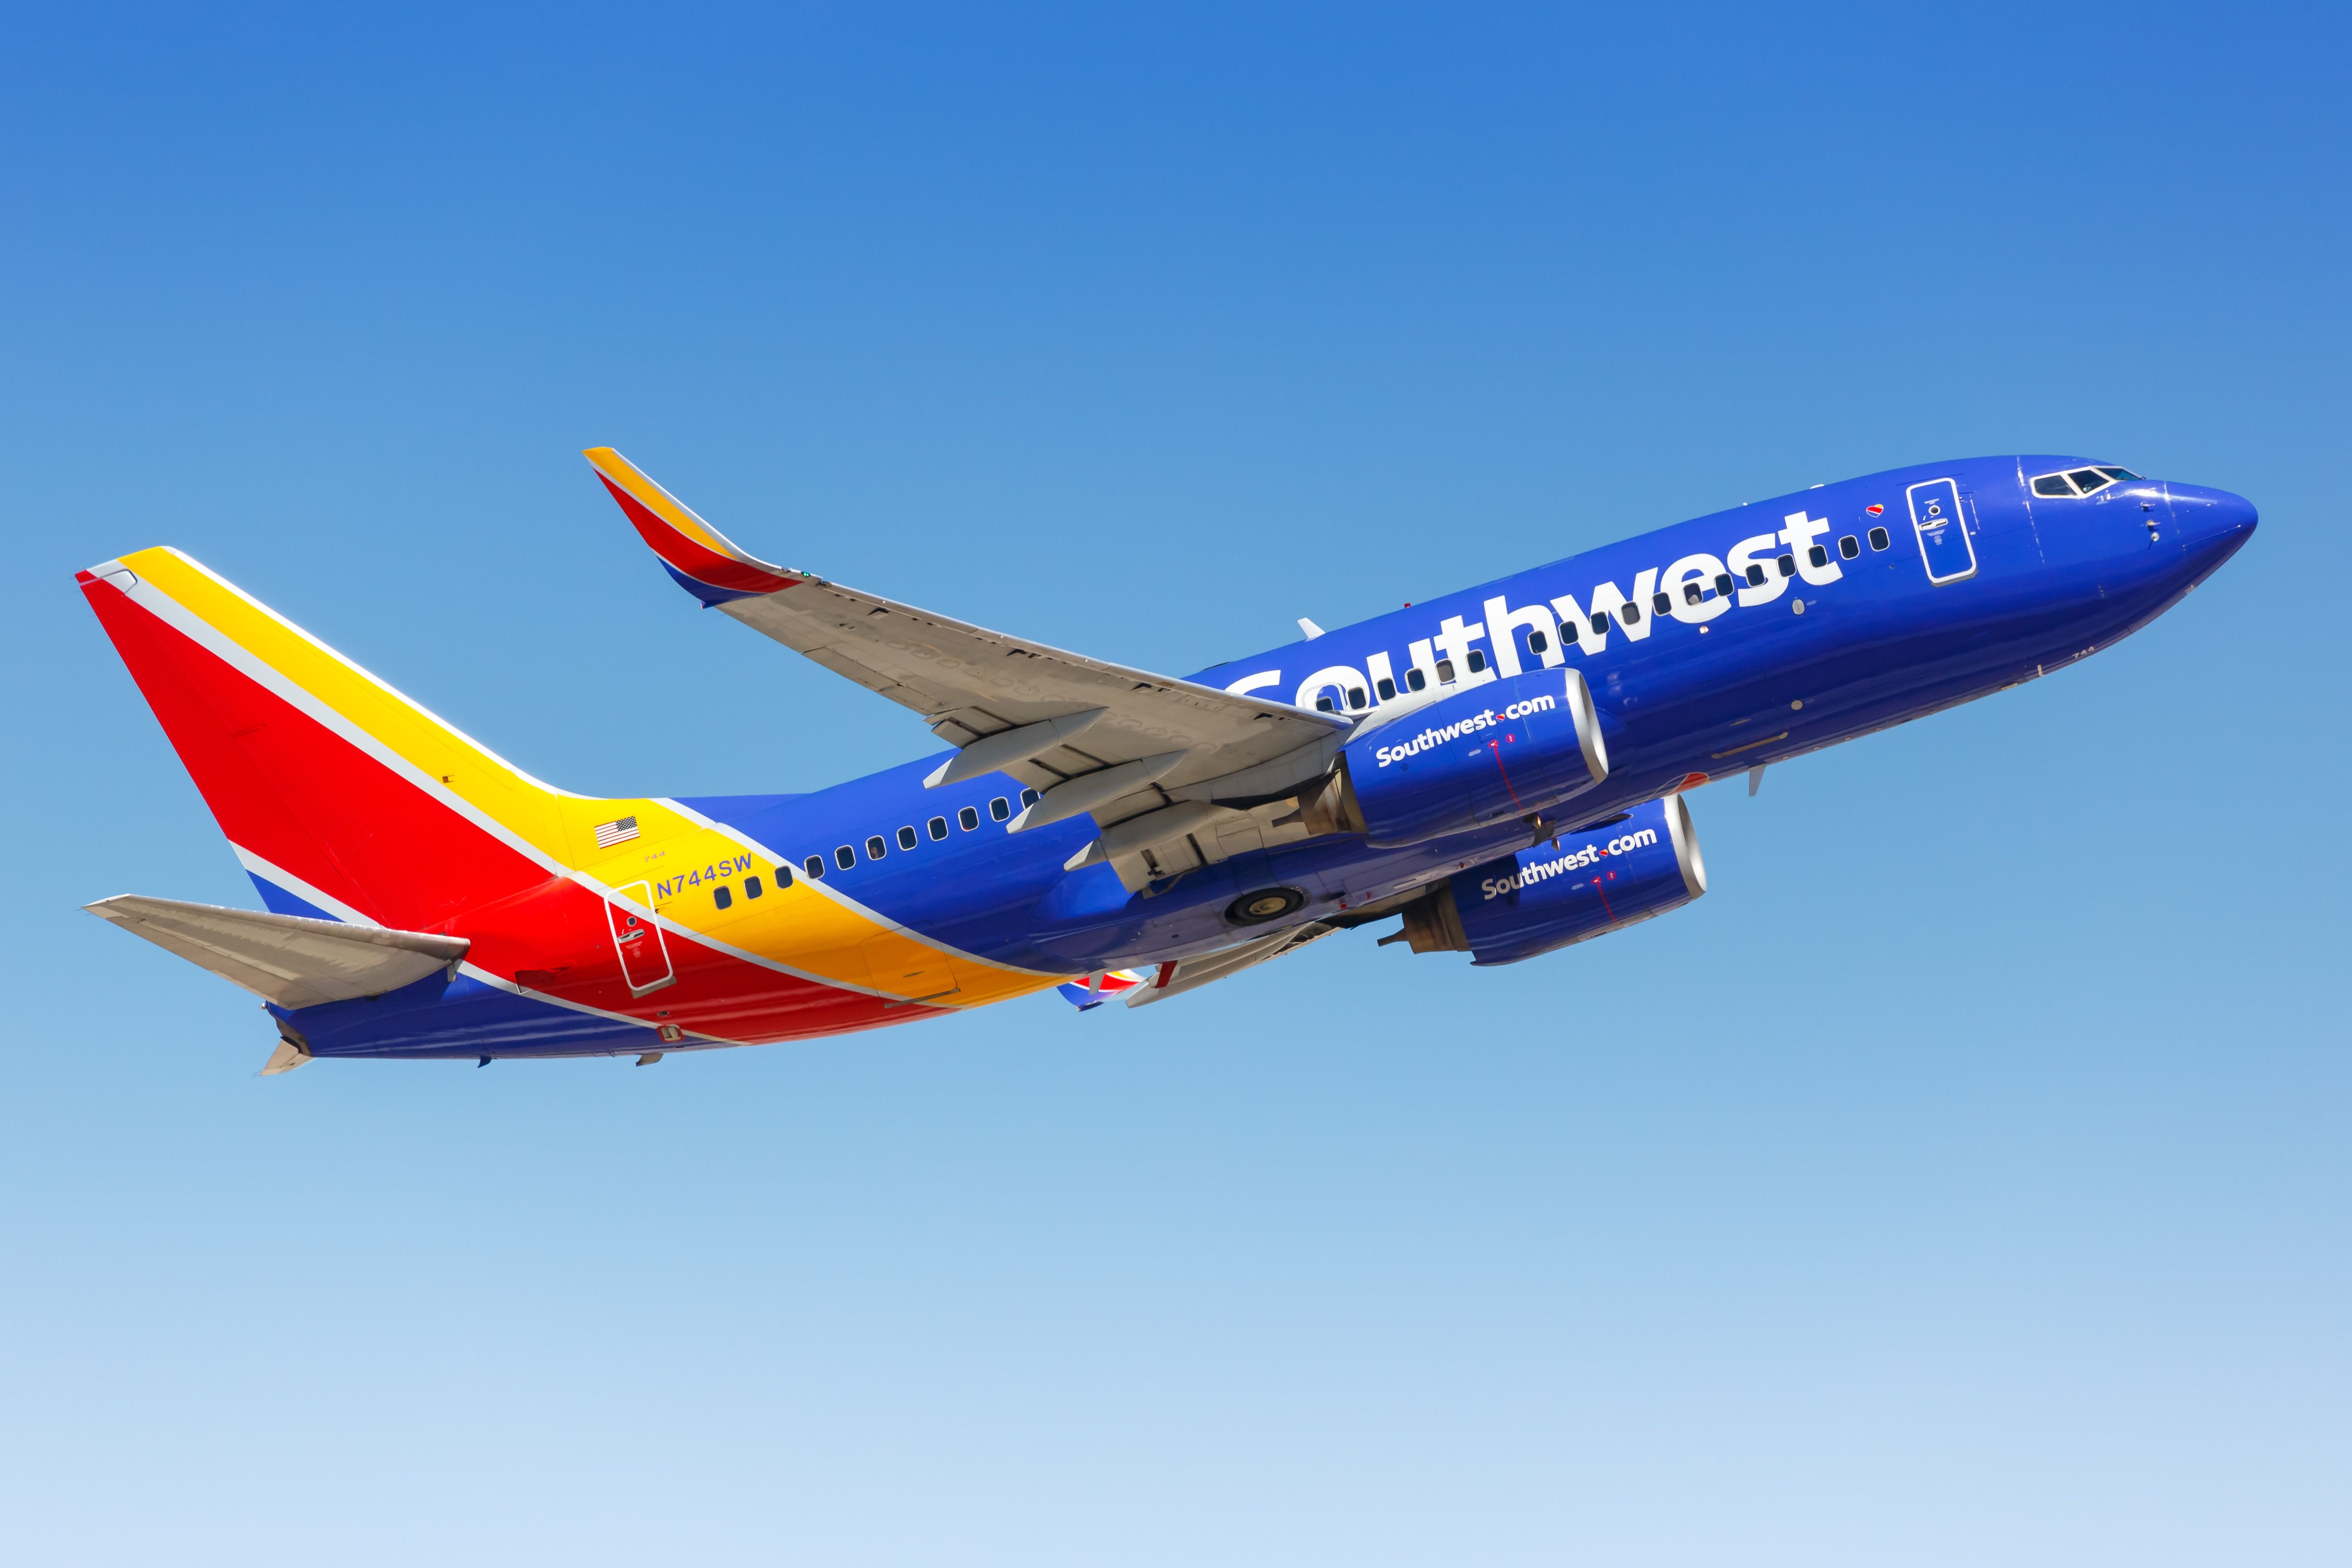 A Southwest Airlines Boeing 737-700 climbing out